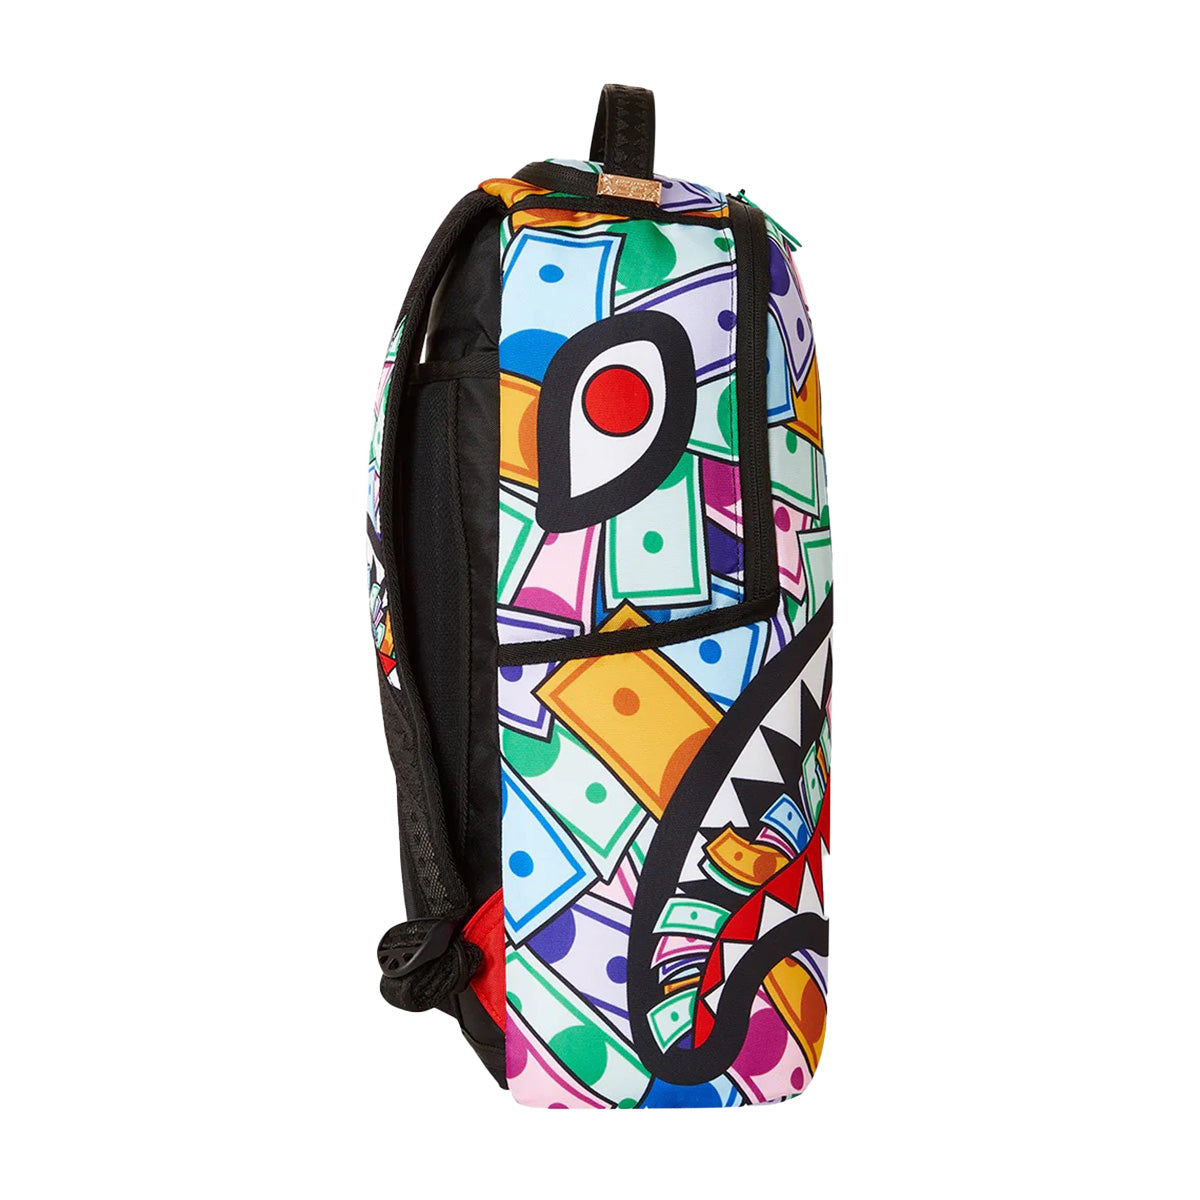 MONOPOLY CAN NEVER BE TOO RICH (DLXV) – SPRAYGROUND®